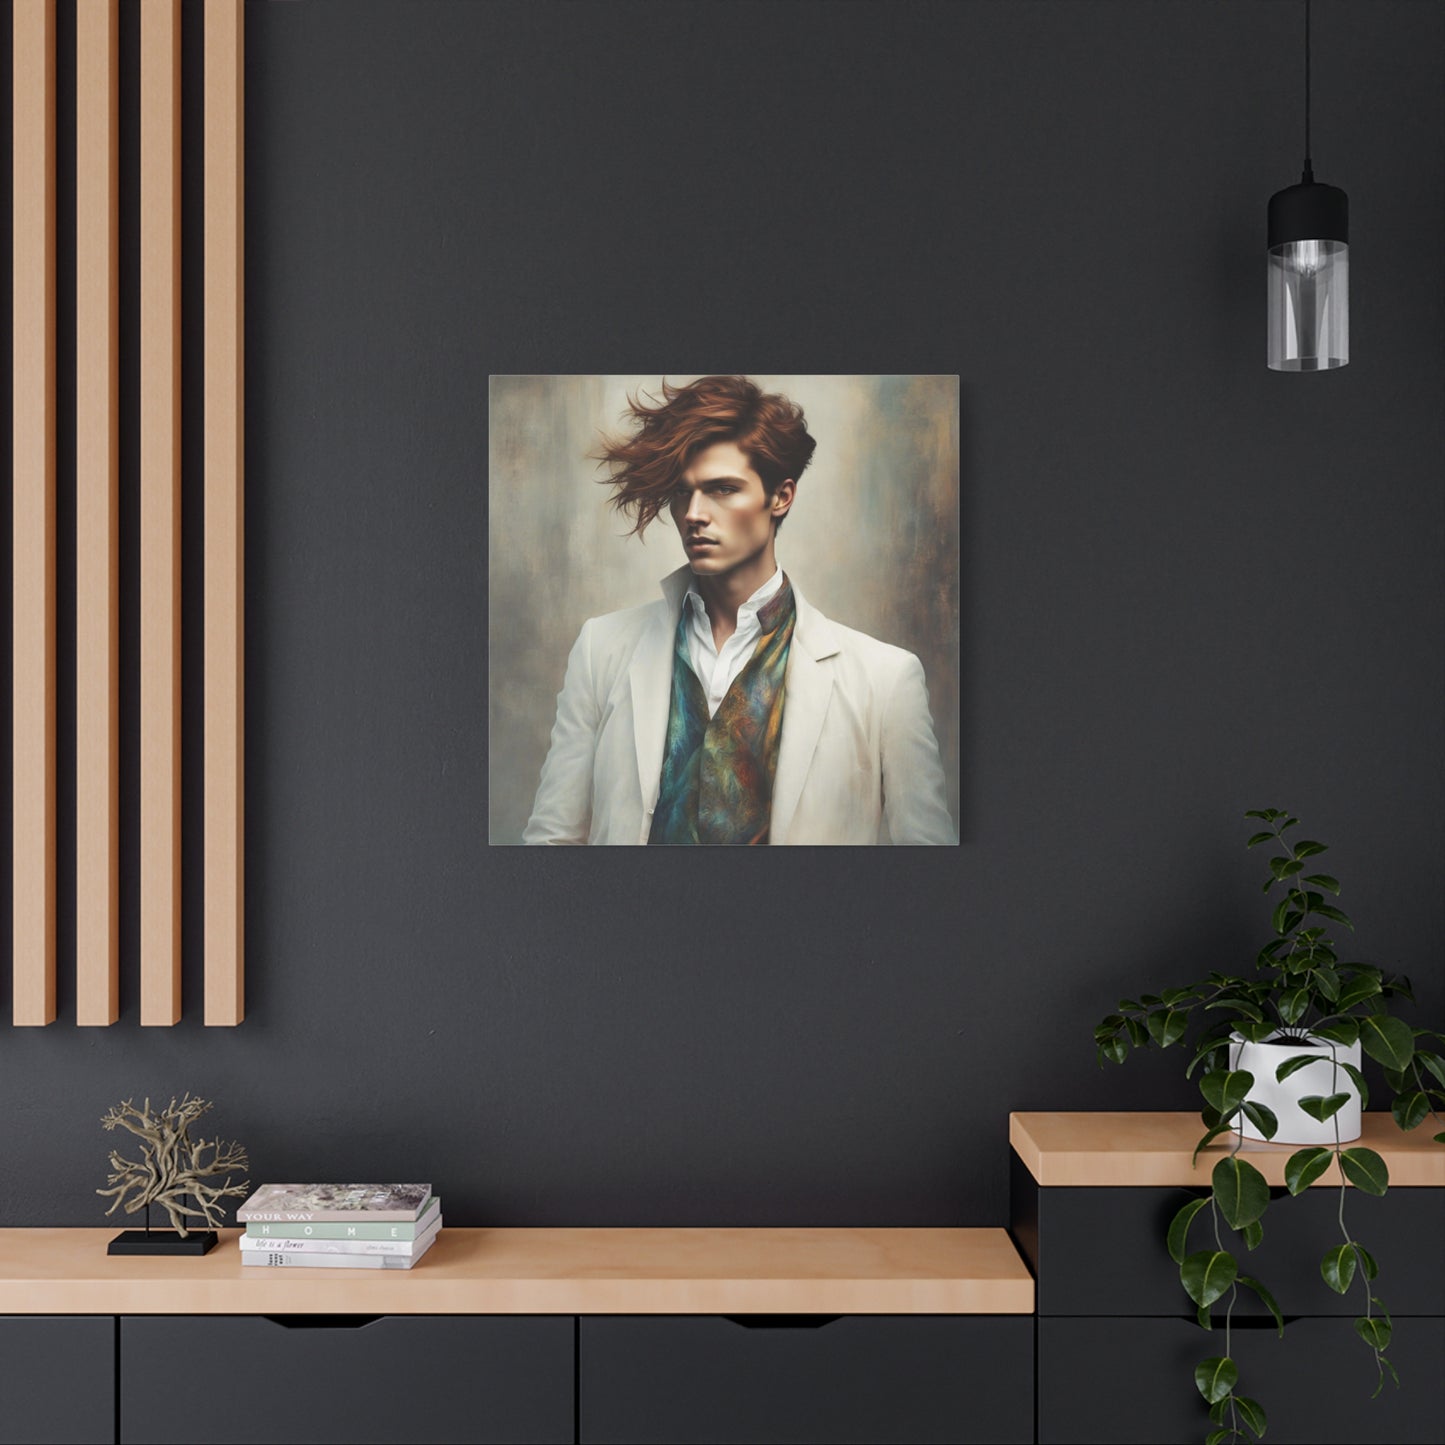 Elio - Ethereal Grace - Available in a Matte Square Canvas Print-Wall Art Decor-Androgynous Figure-High Wedding Fashion Wall Art Decor